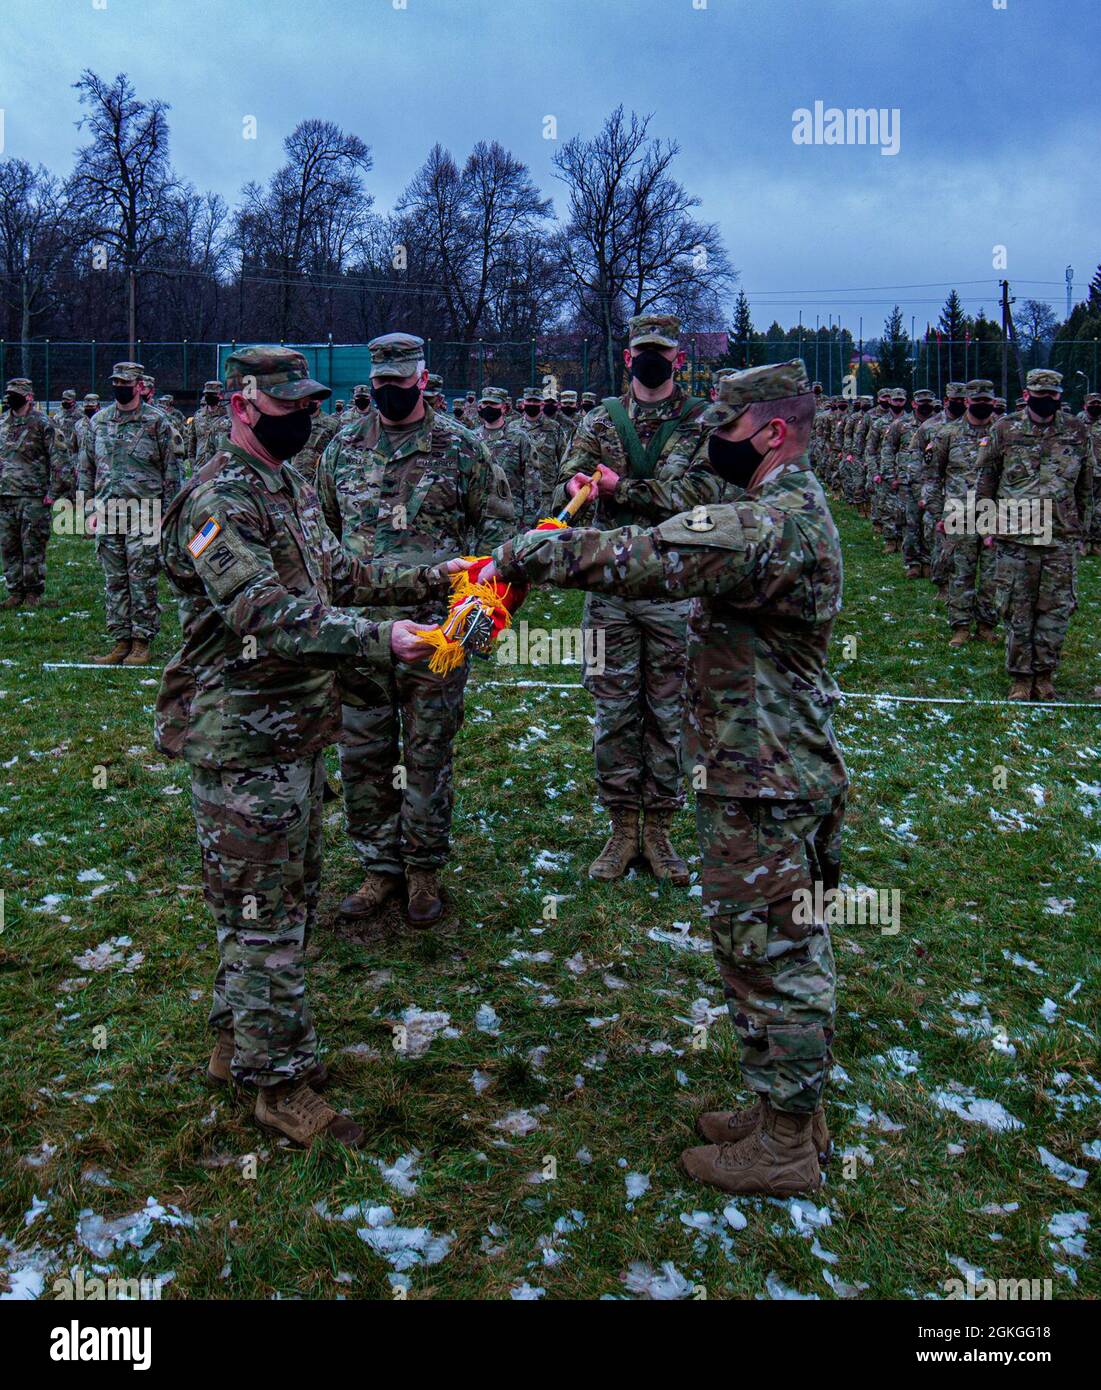 LVIV, Ukraine - Task Force Raven, 81st Stryker Brigade Combat Team, Washington Army National Guard, assumed command of the Joint Multinational Training Group-Ukraine mission at Collective Training Center – Yavoriv, Ukraine, during a Transfer of Authority ceremony April 16, 2021. Stock Photo